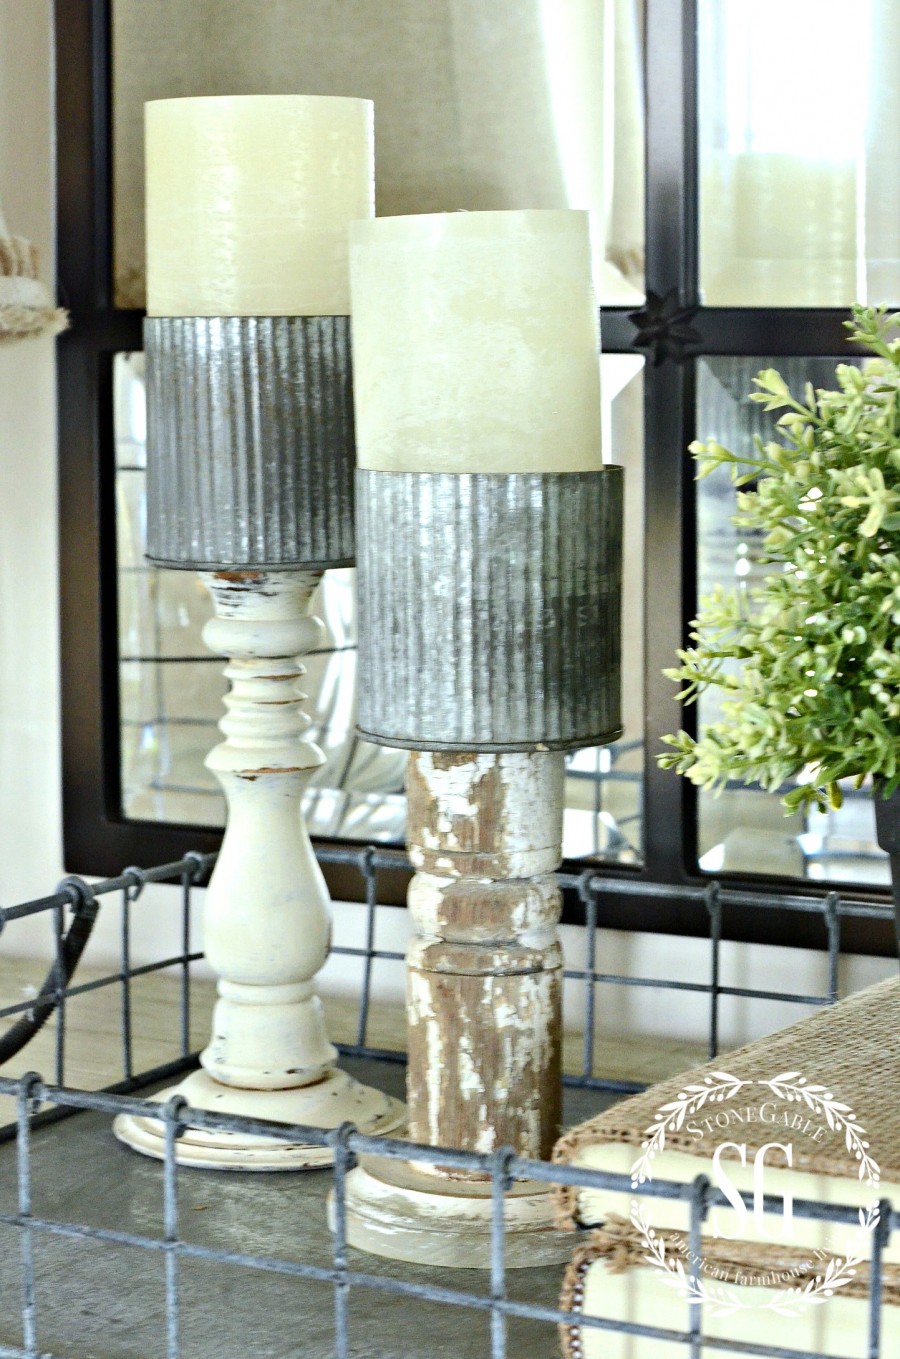 BUFFET IN FOYER-chippy candlesticks with tin tops-stonegableblog.com